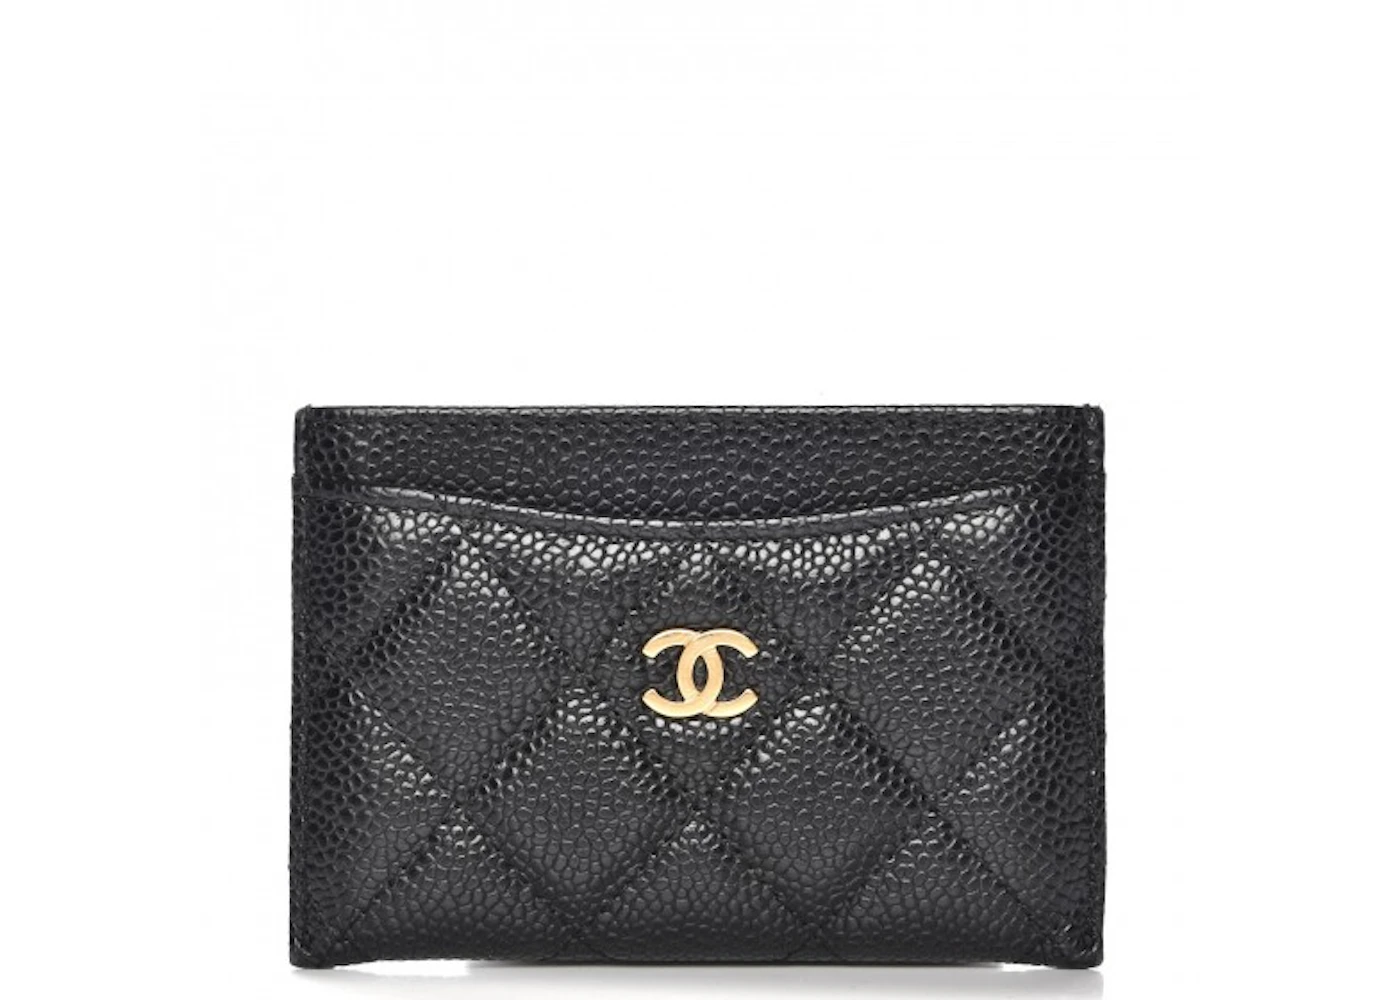 Chanel Card Holder Prices